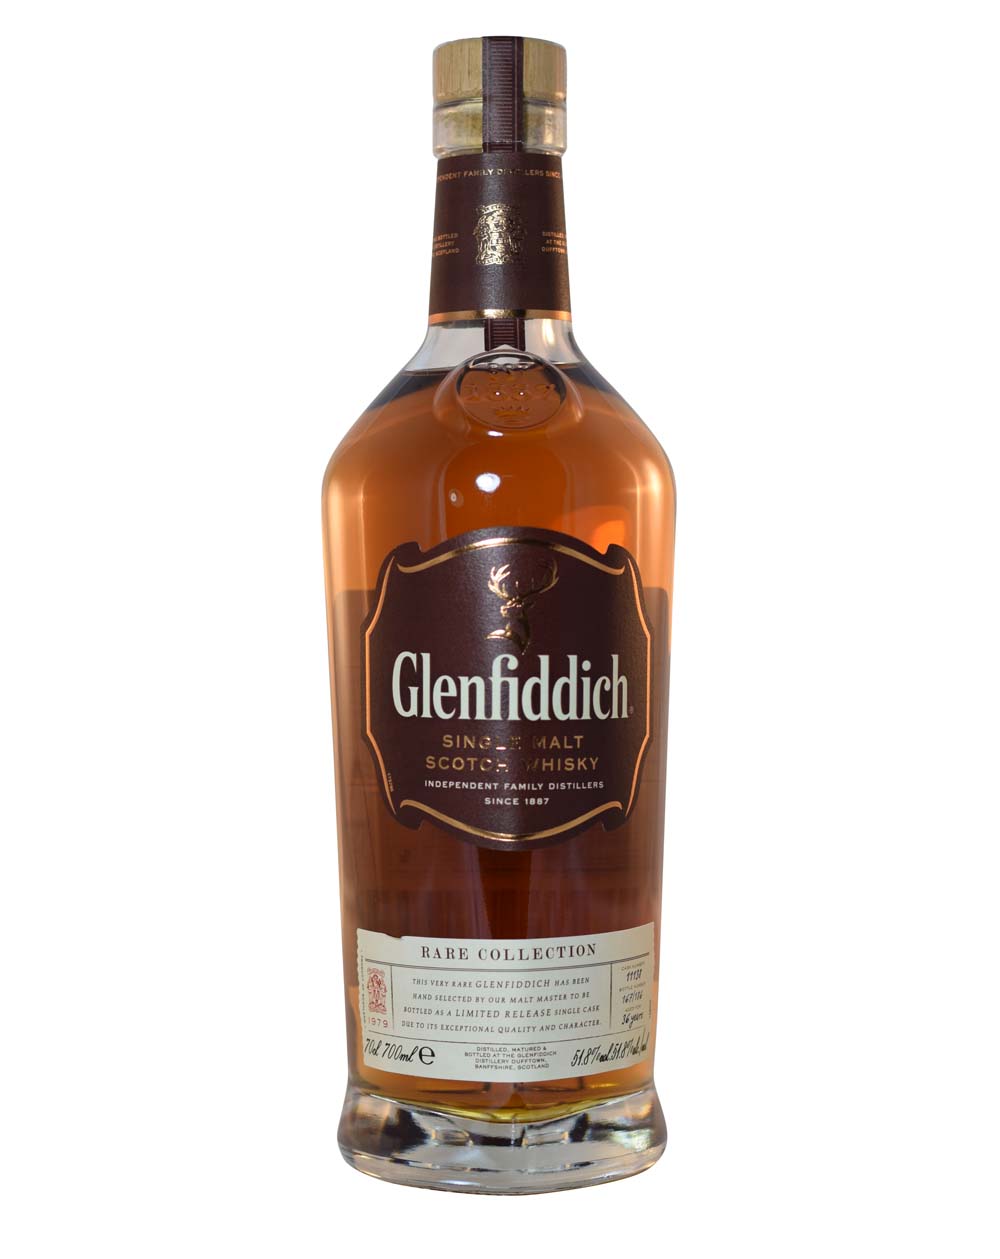 Glenfiddich 1979 Rare Collection Cask #11138 (36 Years Old) Musthave Malts MHM